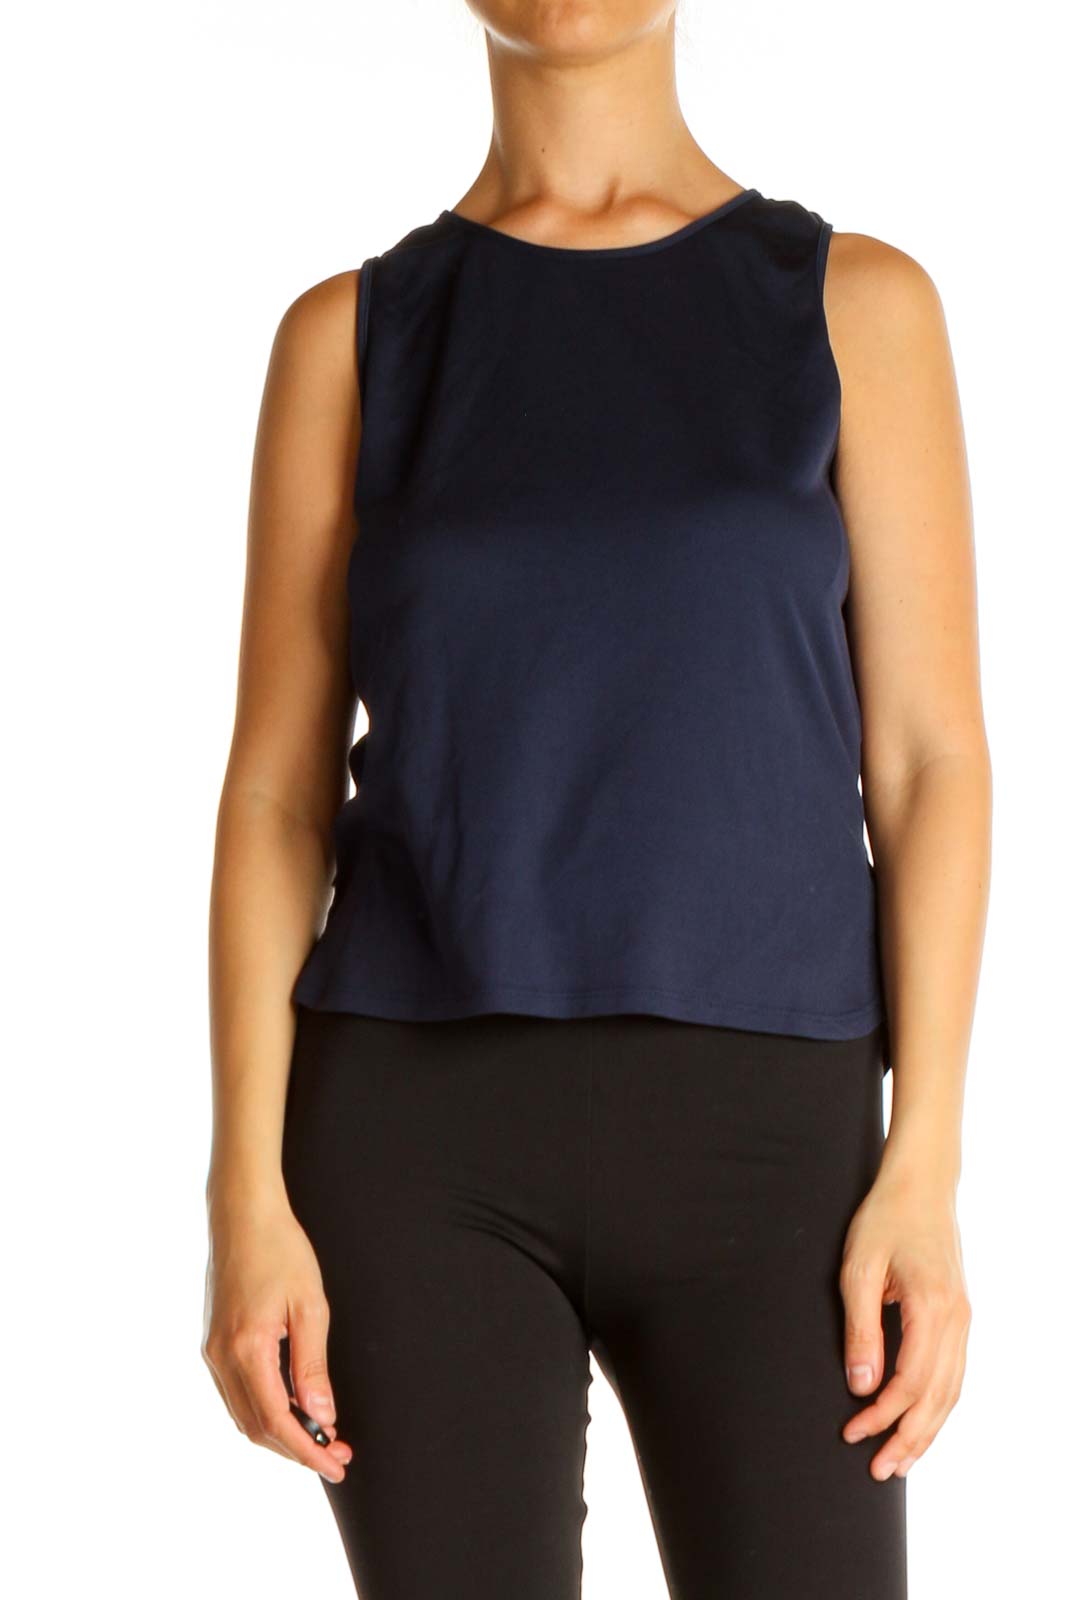 Blue Activewear Tank Top Front